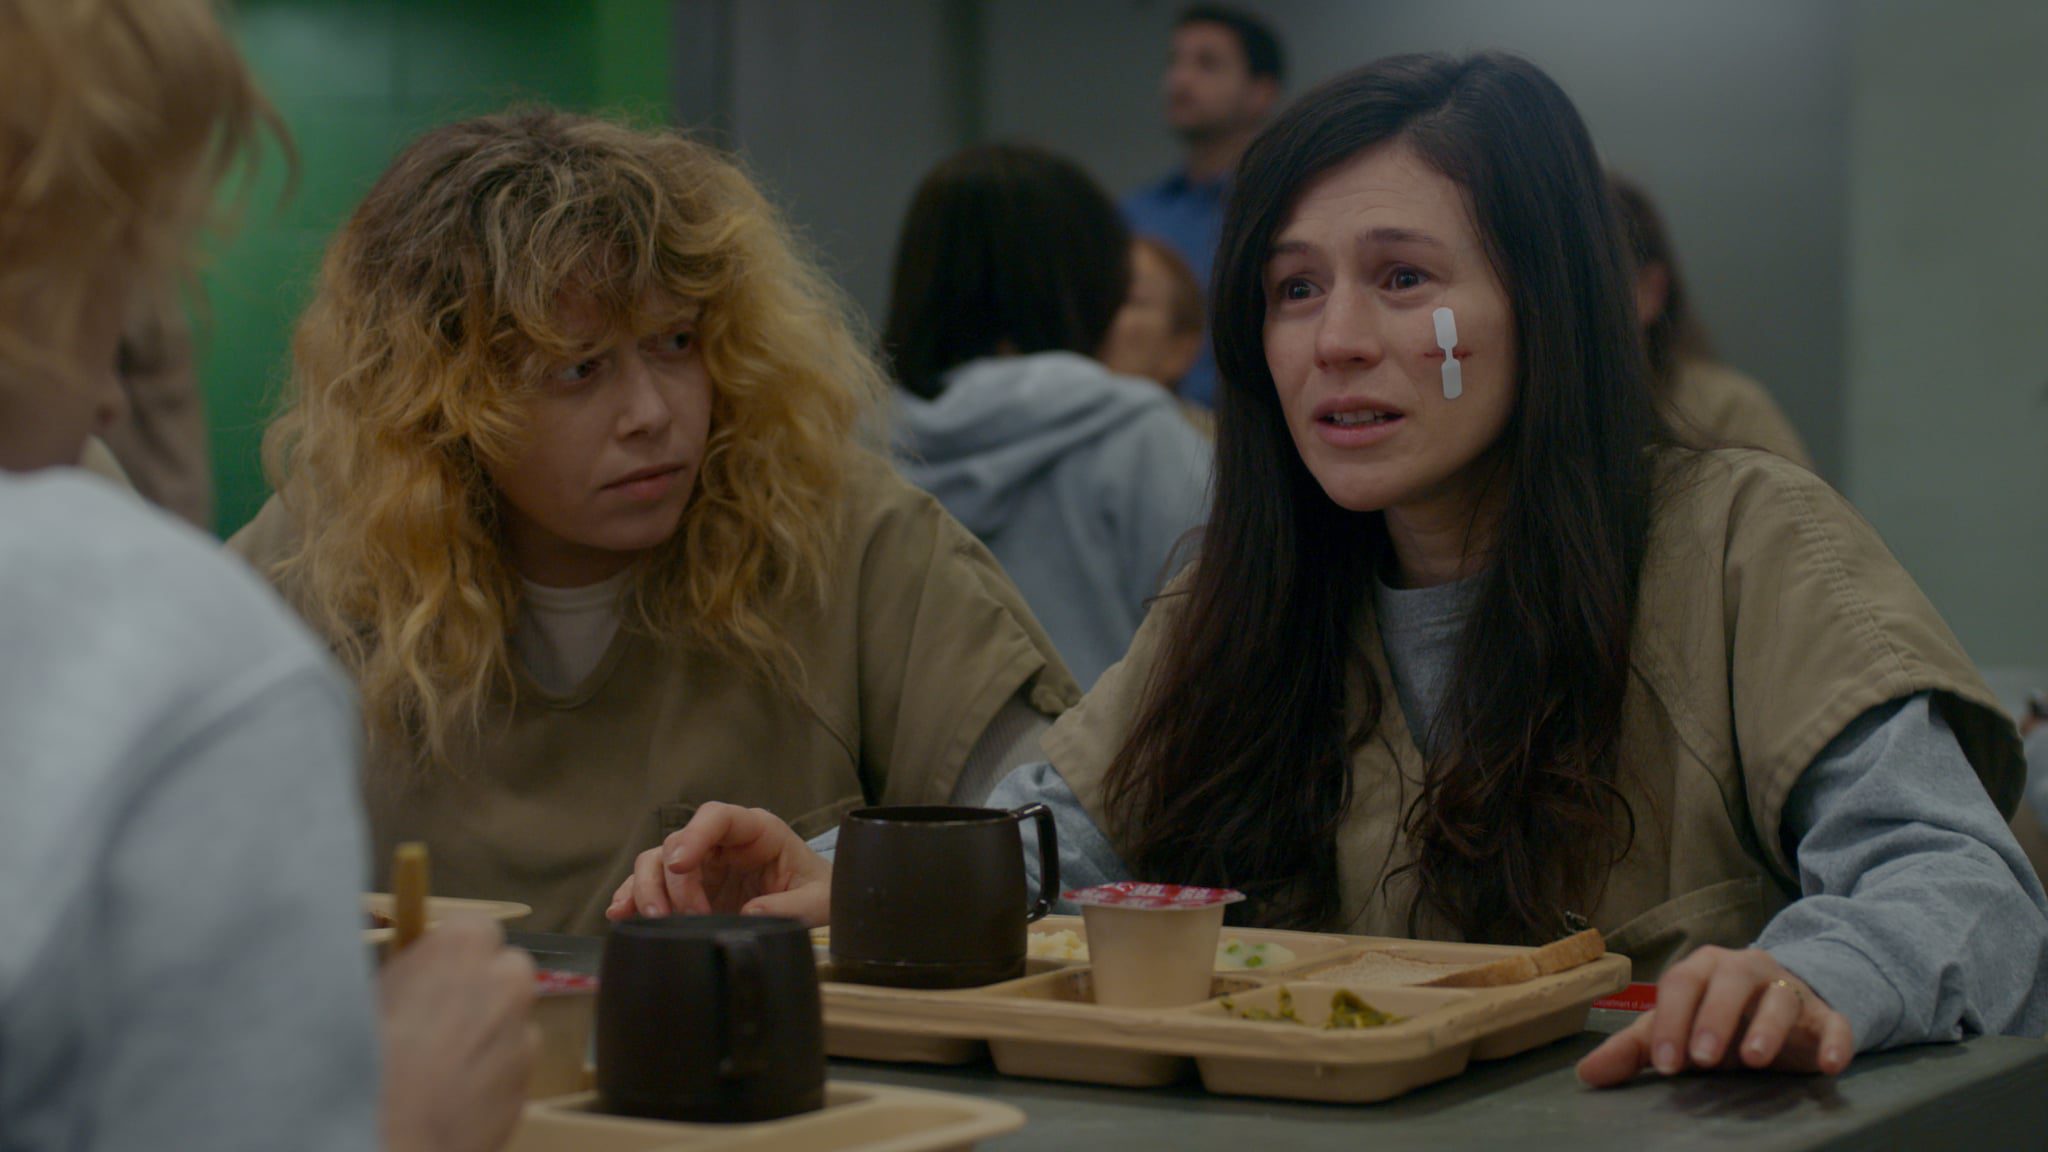 Nicky realises that Lorna's madness is beyond her control as they sit in the cafeteria